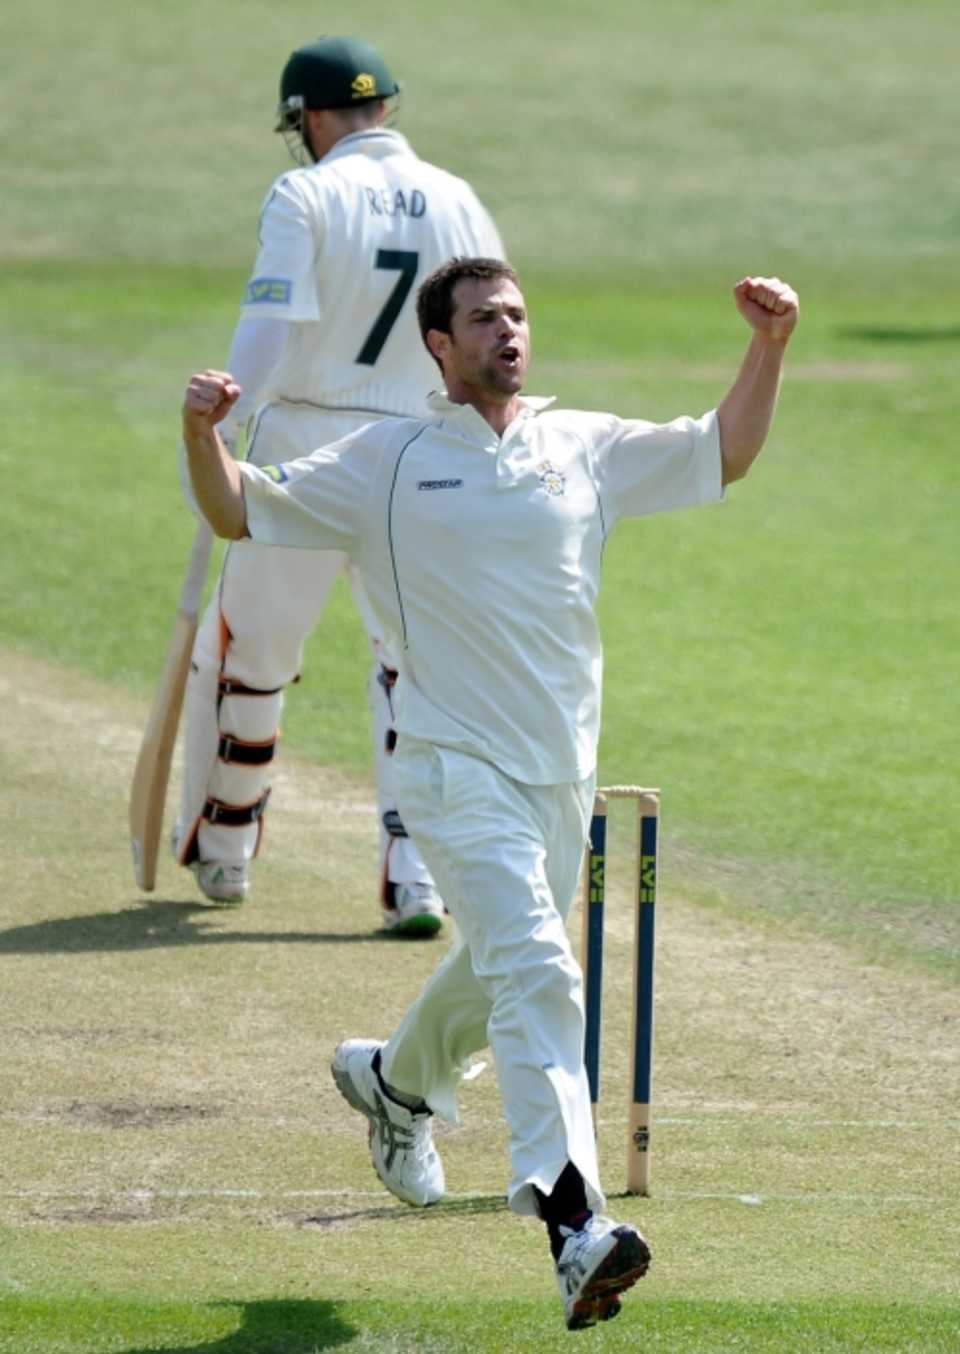 James Tomlinson picked up 5 for 66 on the first day at Trent Bridge